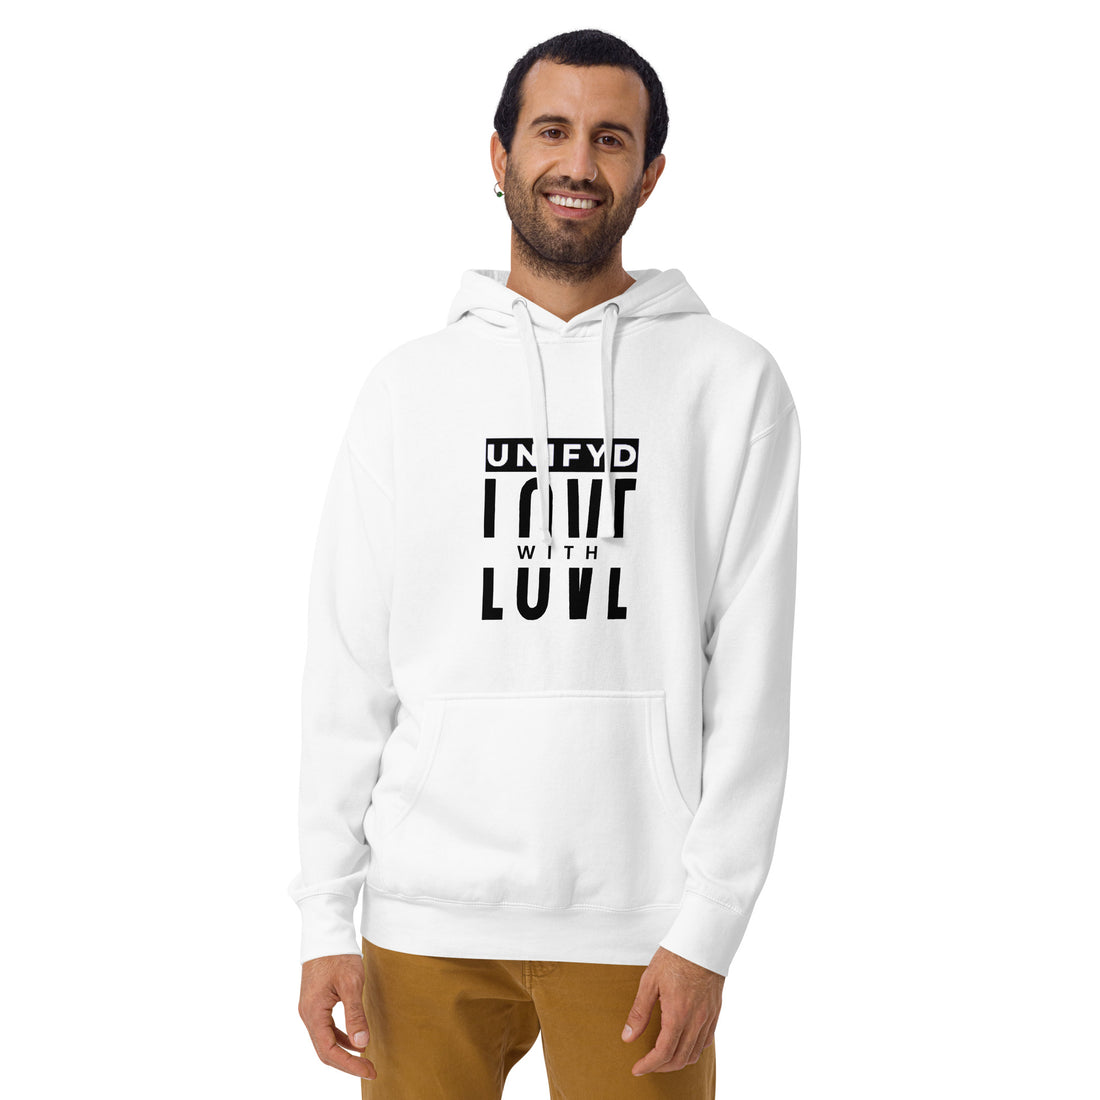 UNIFYD with Love Hoodie